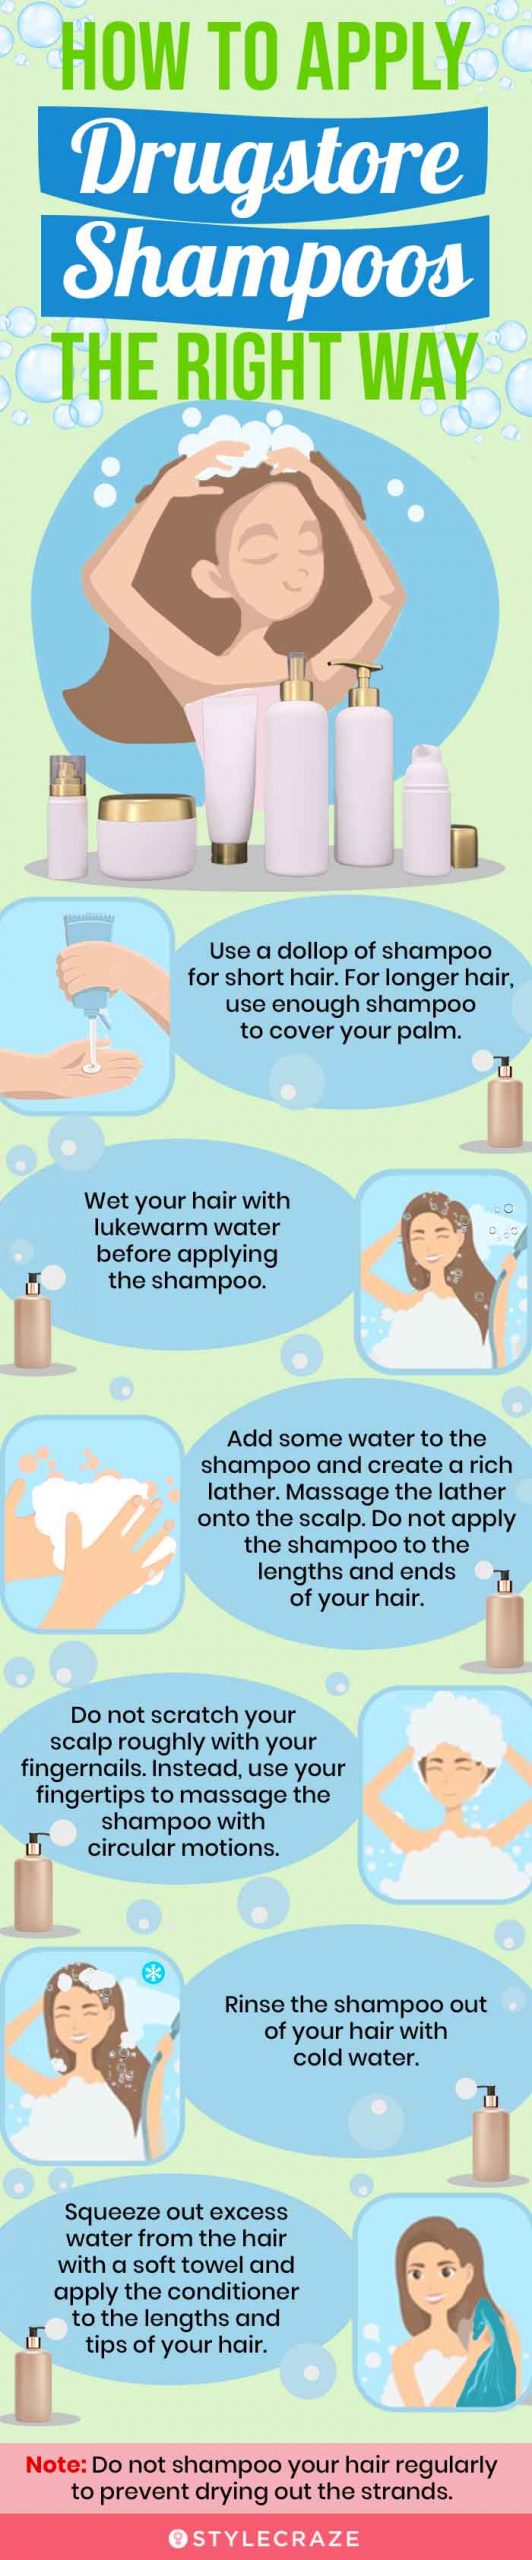 How To Apply Drugstore Shampoo The Right Way (infographic)